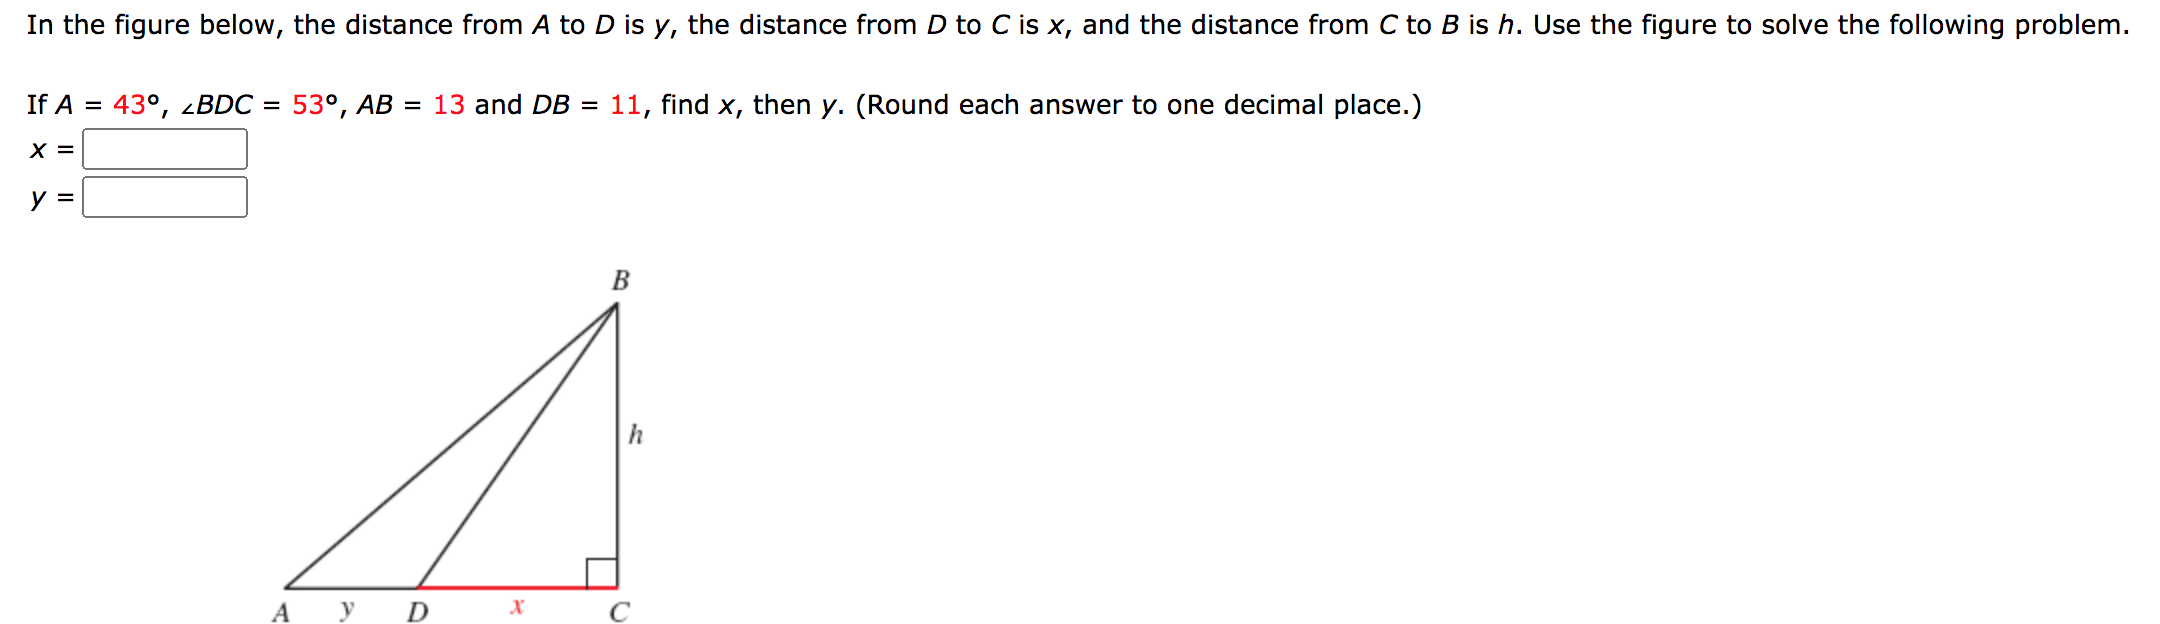 In the figure below, the distance from A to D is y, the distance from D to C is x, and the distance from C to B is h. Use the figure to solve the following problem.
If A = 43°, <BDC =
53°, AB = 13 and DB =
11, find x, then y. (Round each answer to one decimal place.)
X =
y =
h
A
D
